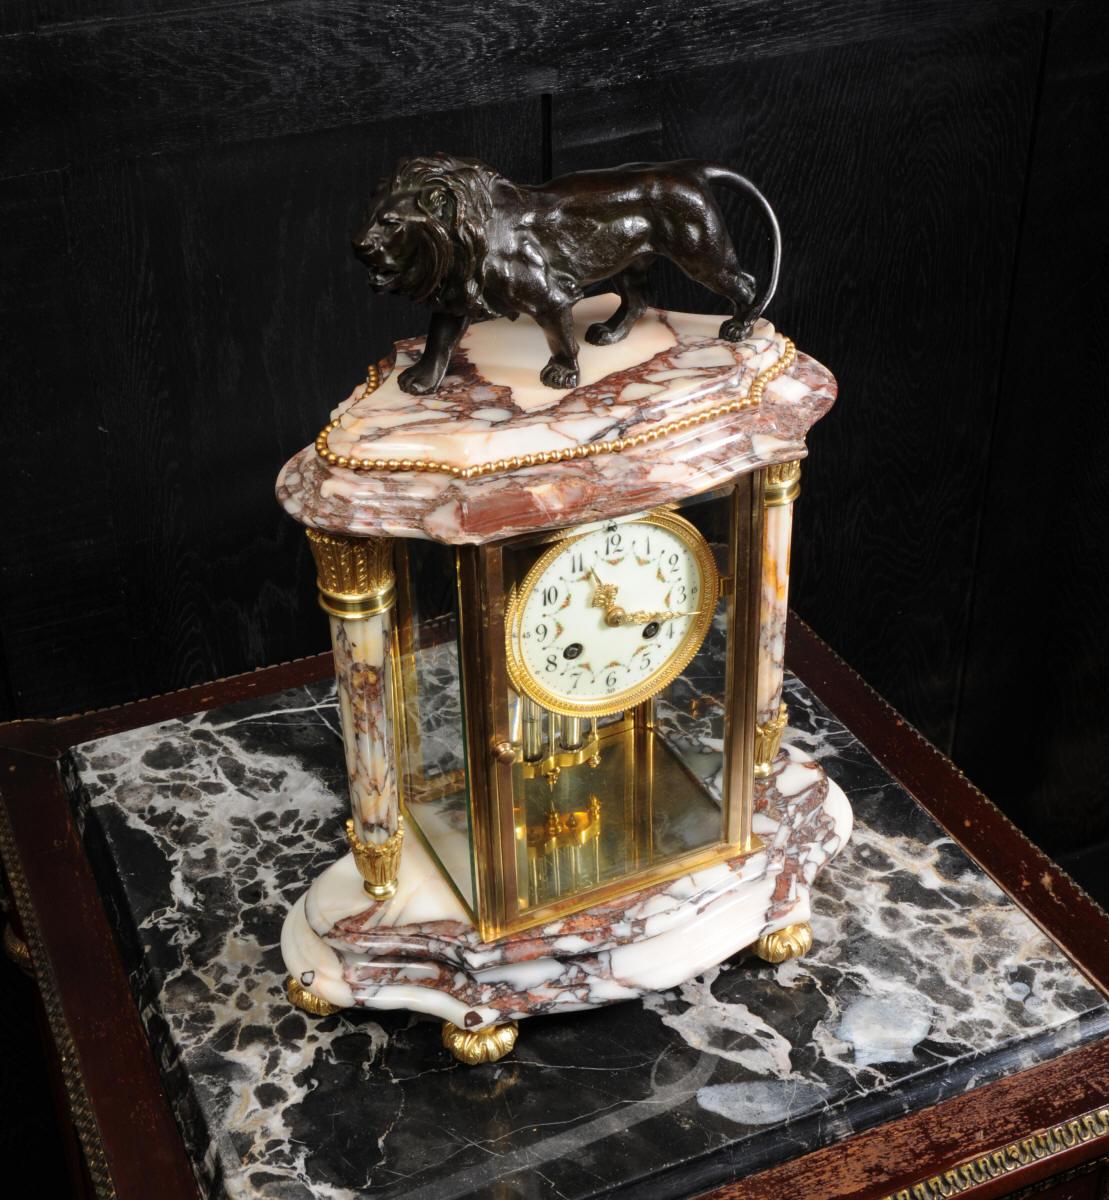 A beautiful antique French specimen marble library four glass or crystal regulator clock by the renown maker Japy Frères, circa 1880. It is classical in style with two reeded acanthus troche columns and a well modeled bronze lion standing proudly to